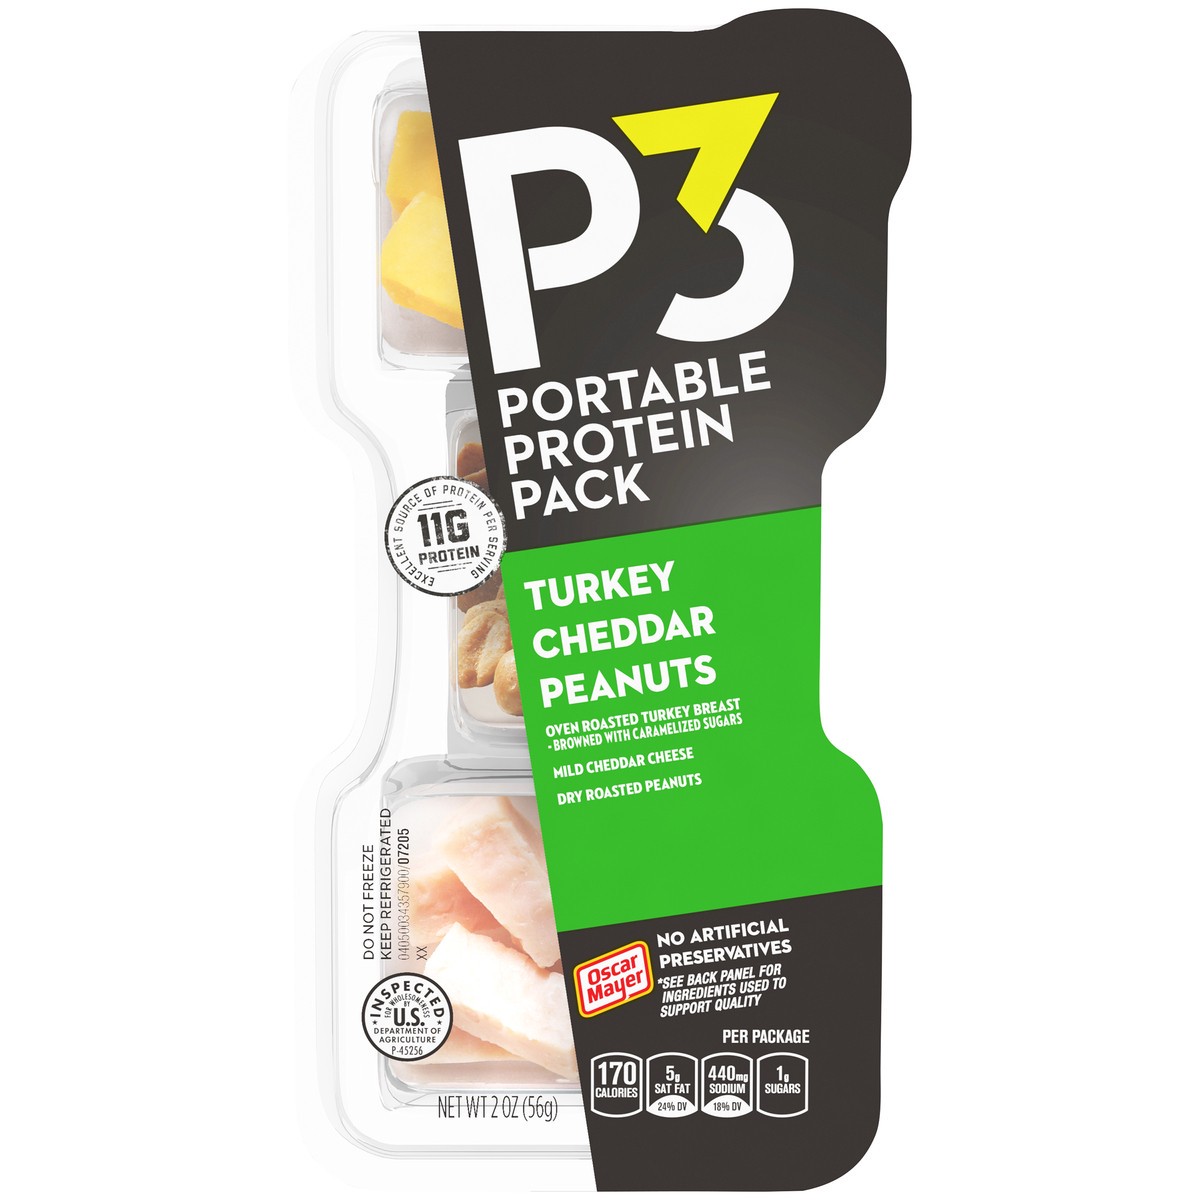 slide 1 of 9, P3 Portable Protein Snack Pack with Turkey, Peanuts & Cheddar Cheese, 2 oz Tray, 2 oz